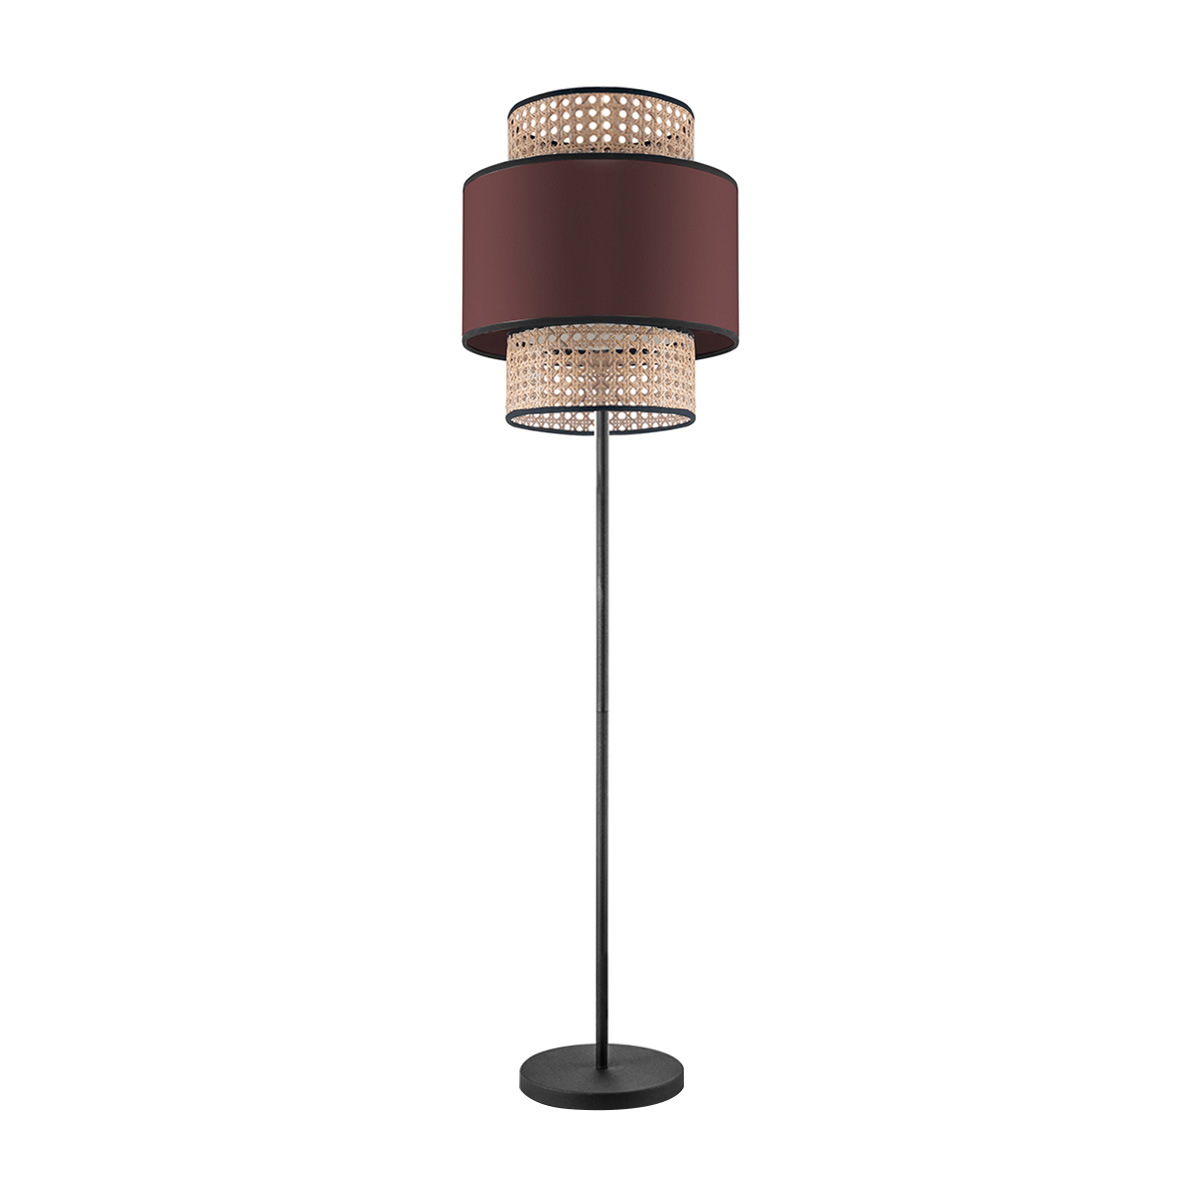 Tangla lighting - TLF7013-30RD - LED floor lamp 1 Light - metal and natural rattan and TC fabric in natural and red - bright - E27